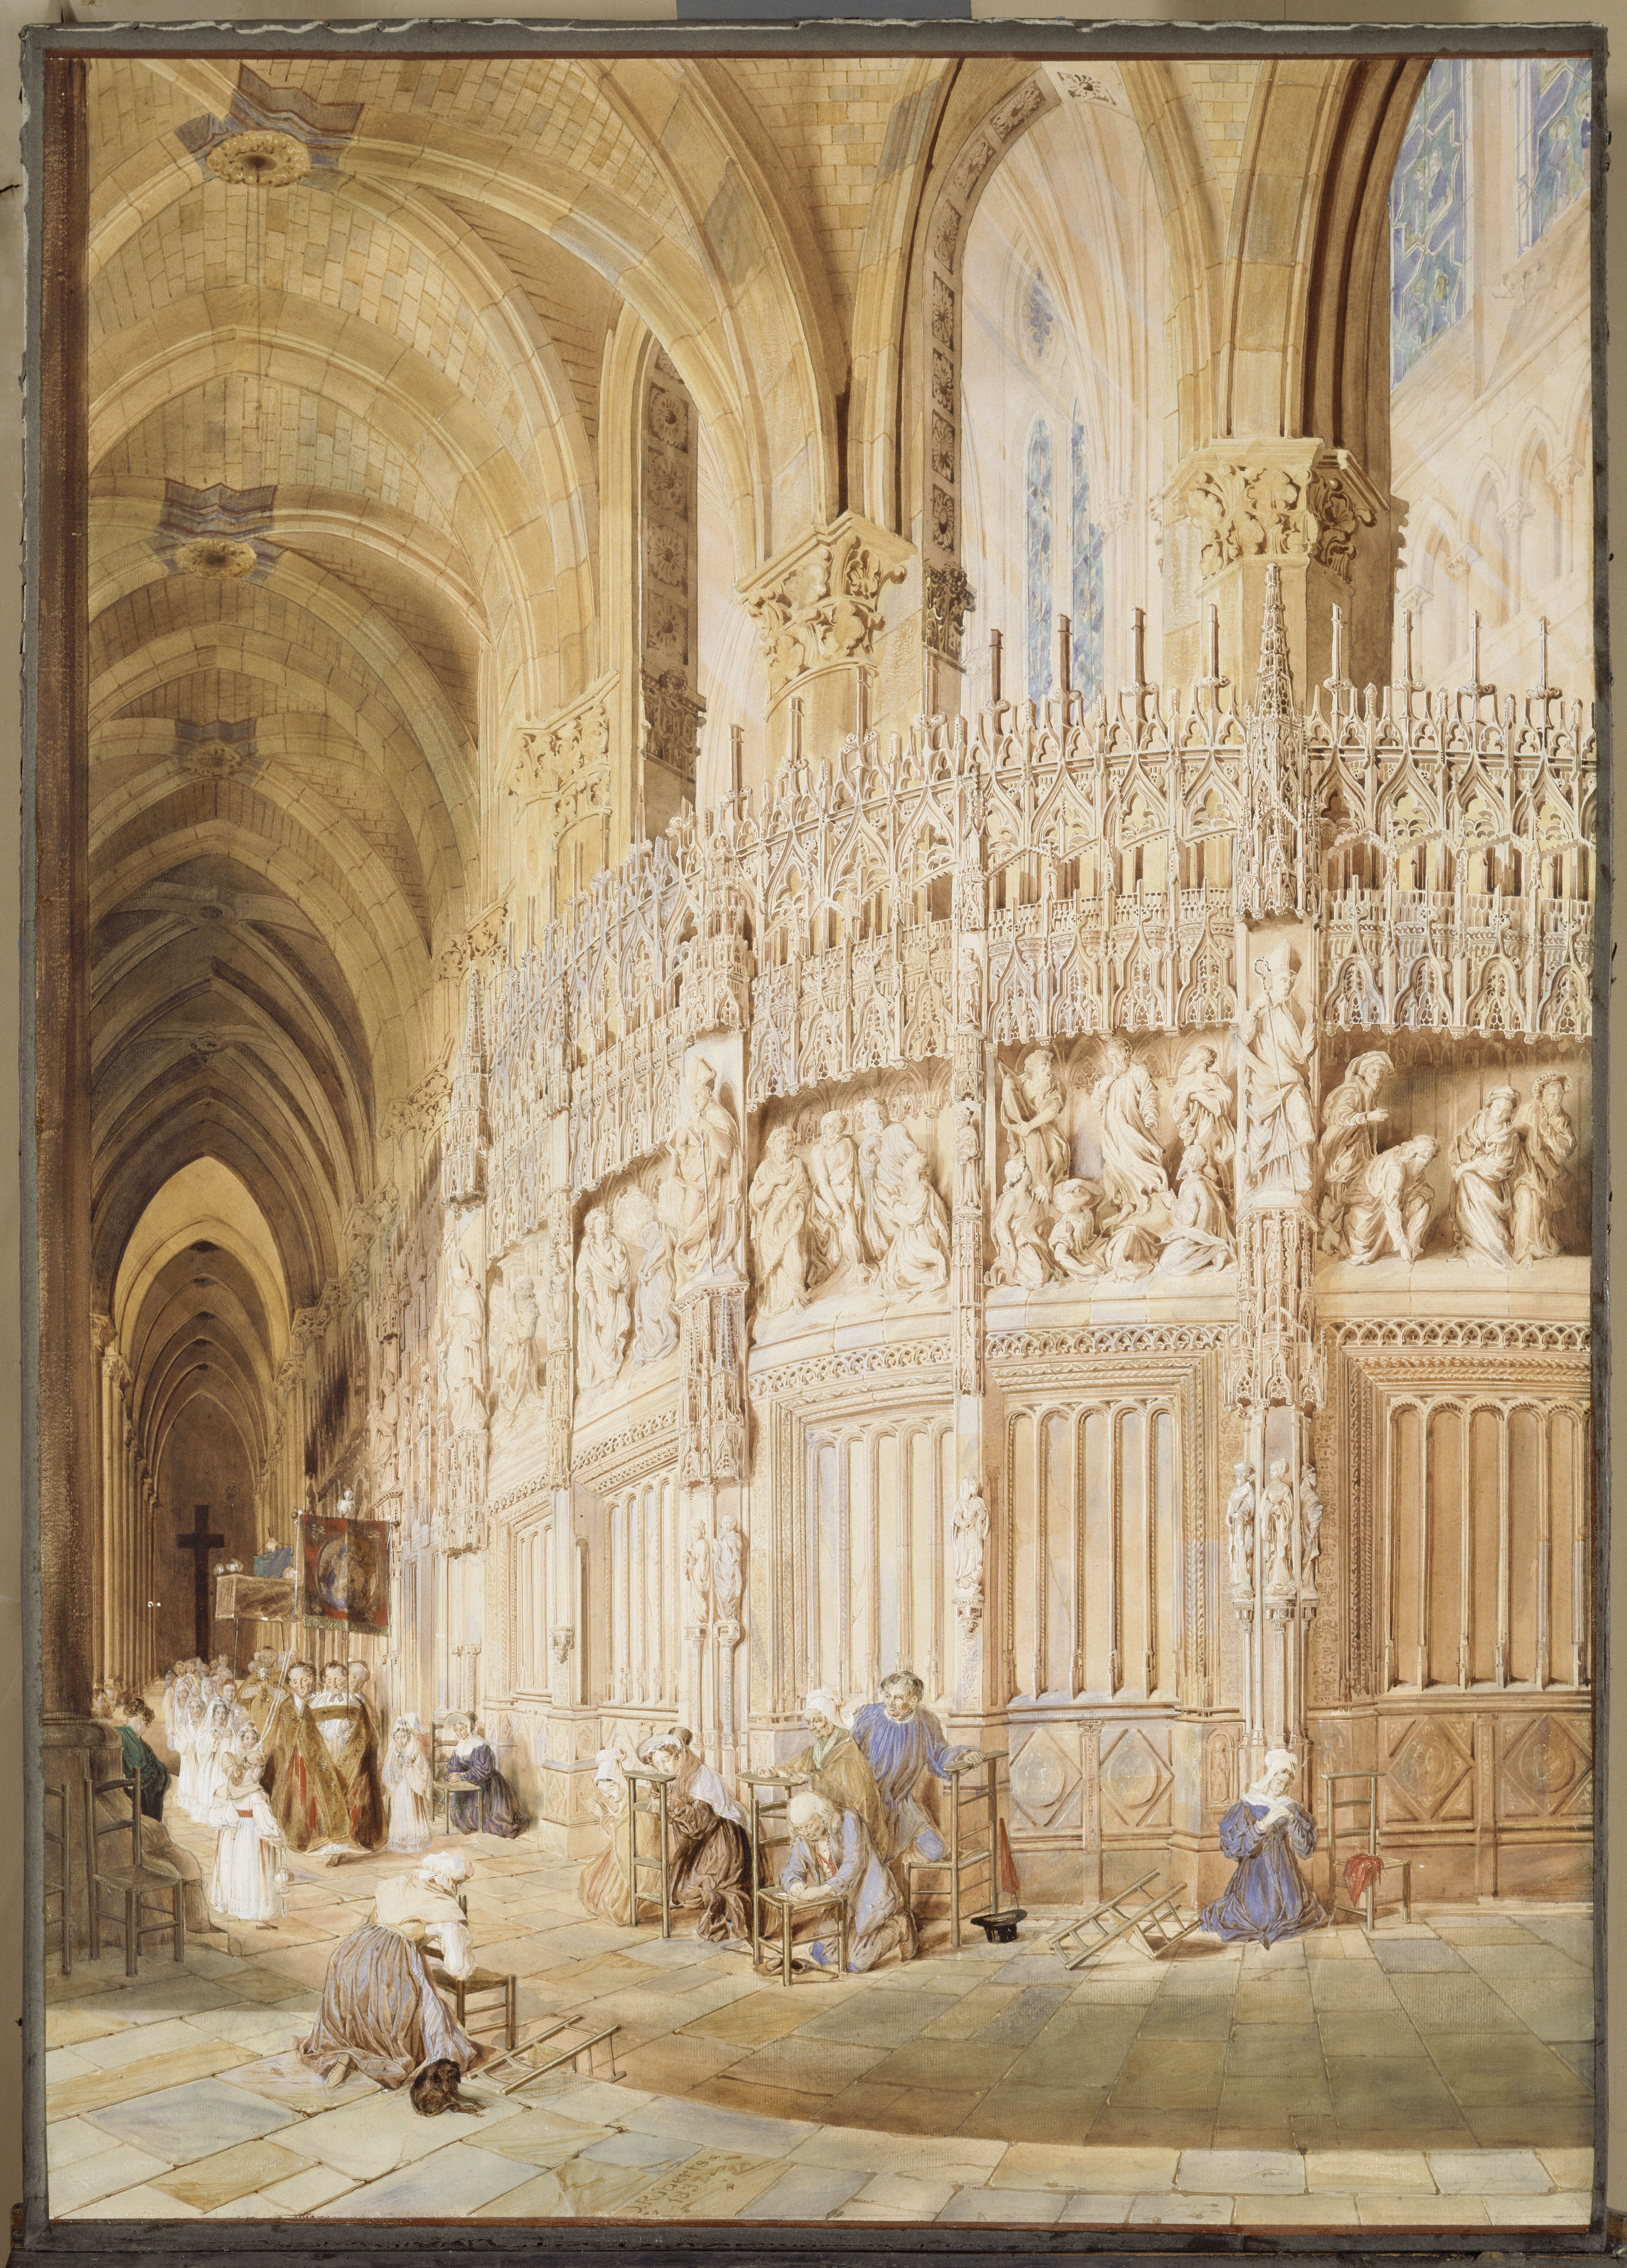 Interior of Chartres Cathedral - château de Fontainebleau - © RMN Grand Palais